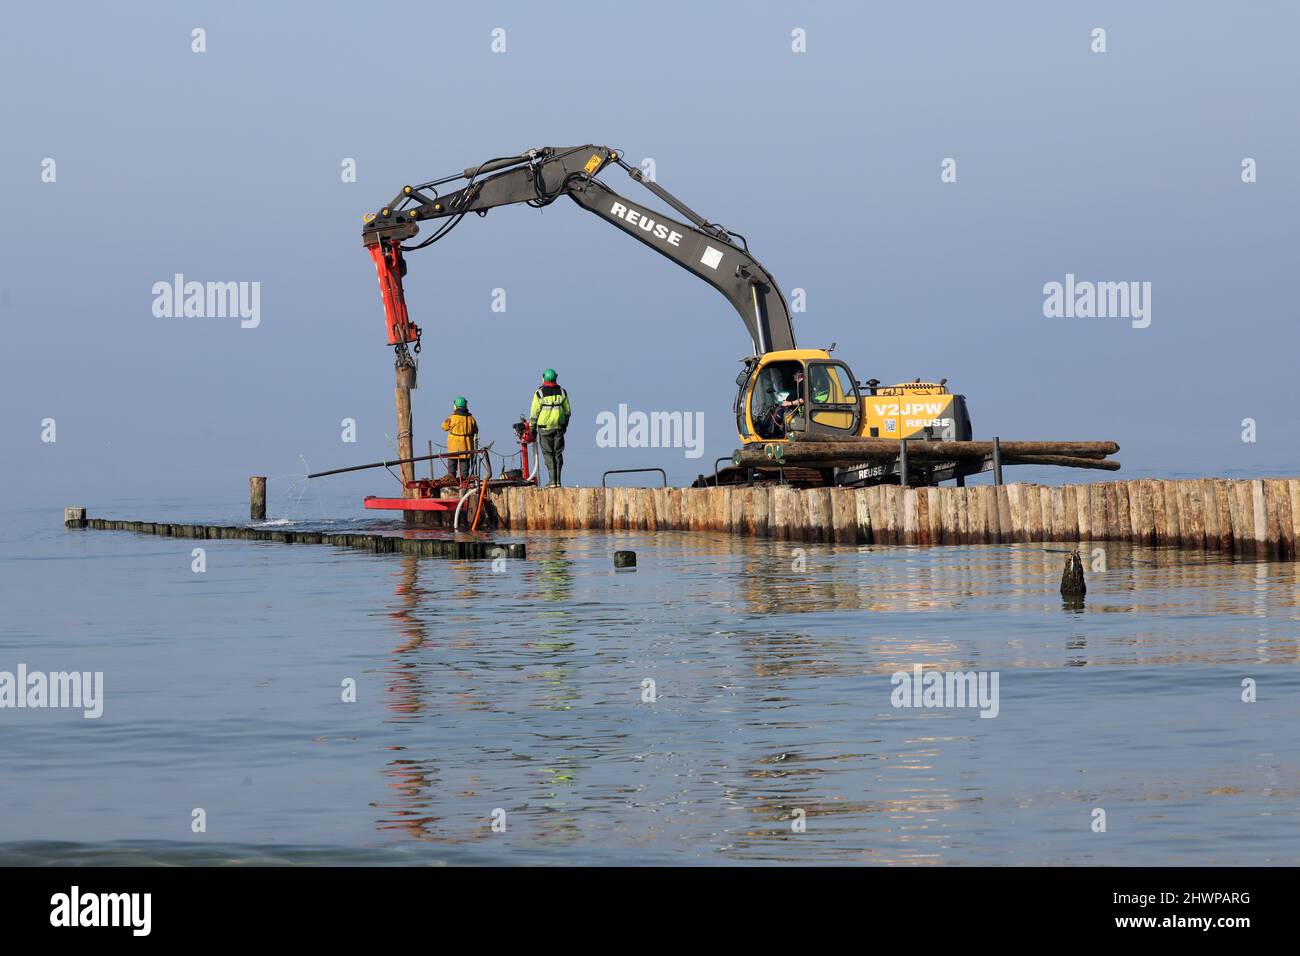 Wustrow, Germany. 02nd Mar, 2022. In the Baltic Sea off Wustrow on the Fischland peninsula, old groynes are being replaced. They were destroyed by the ship borer (Teredo navalis). The replacement of the 21 groynes will cost 1.9 million euros and last from September 2021 to May 2022. The new groynes are built seaward(off) from certified tropical wood that can resist the ship borer. Credit: Bernd Wüstneck/dpa-Zentralbild/ZB/dpa/Alamy Live News Stock Photo